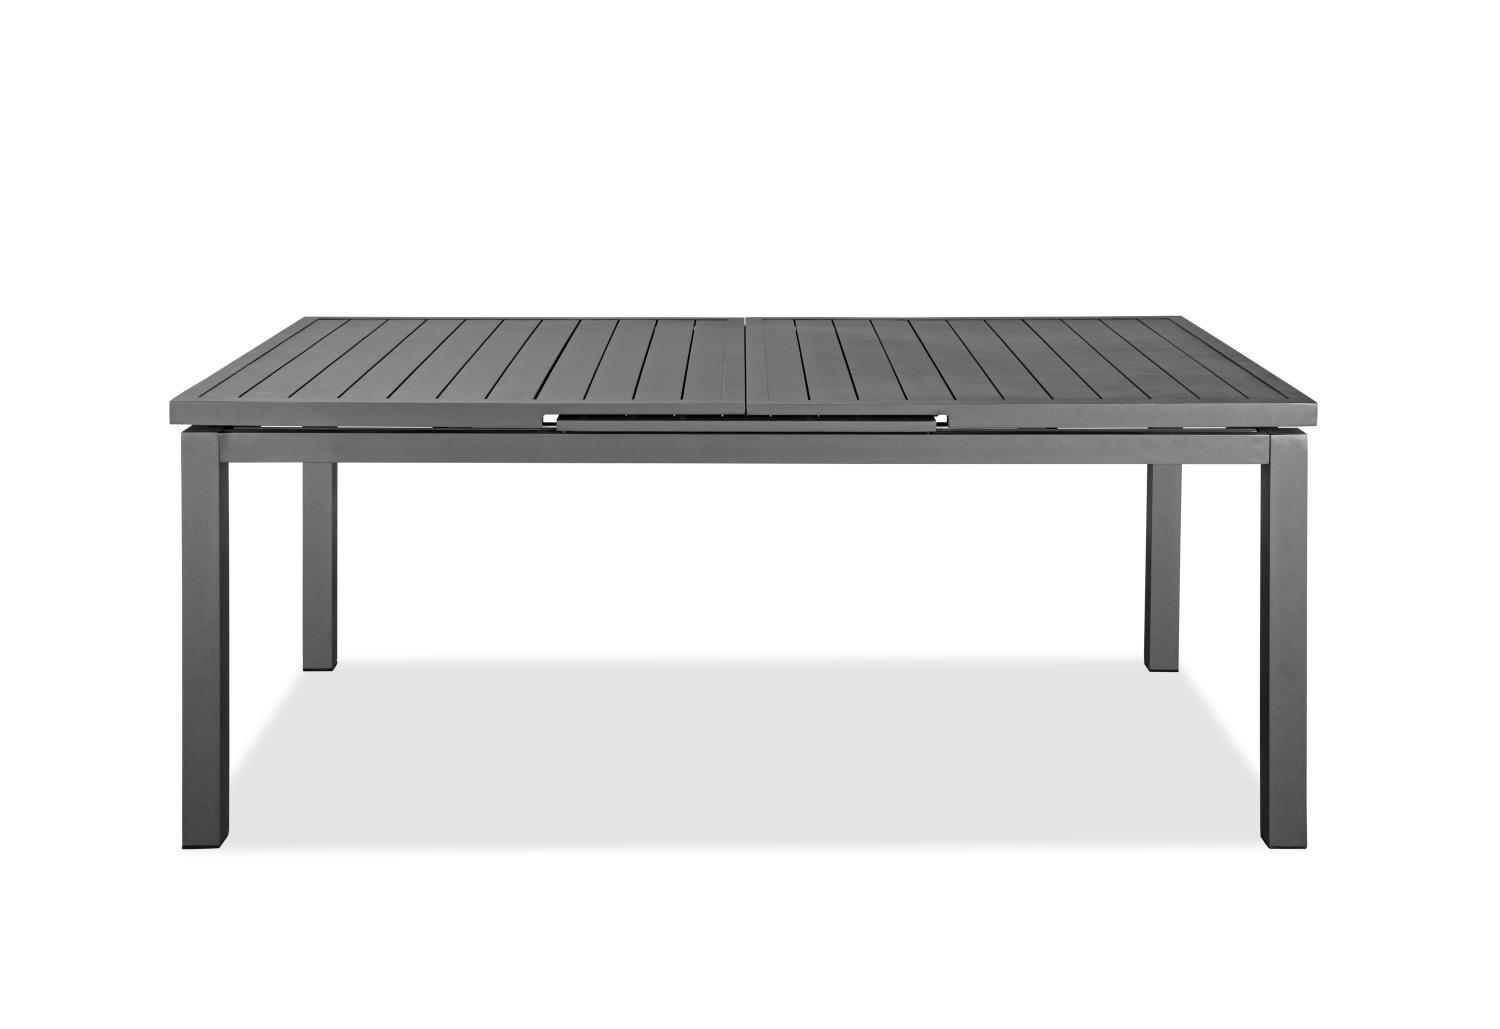 Whiteline Alum Indoor Outdoor Extendable Dining Table In Grey DT1567-GRY